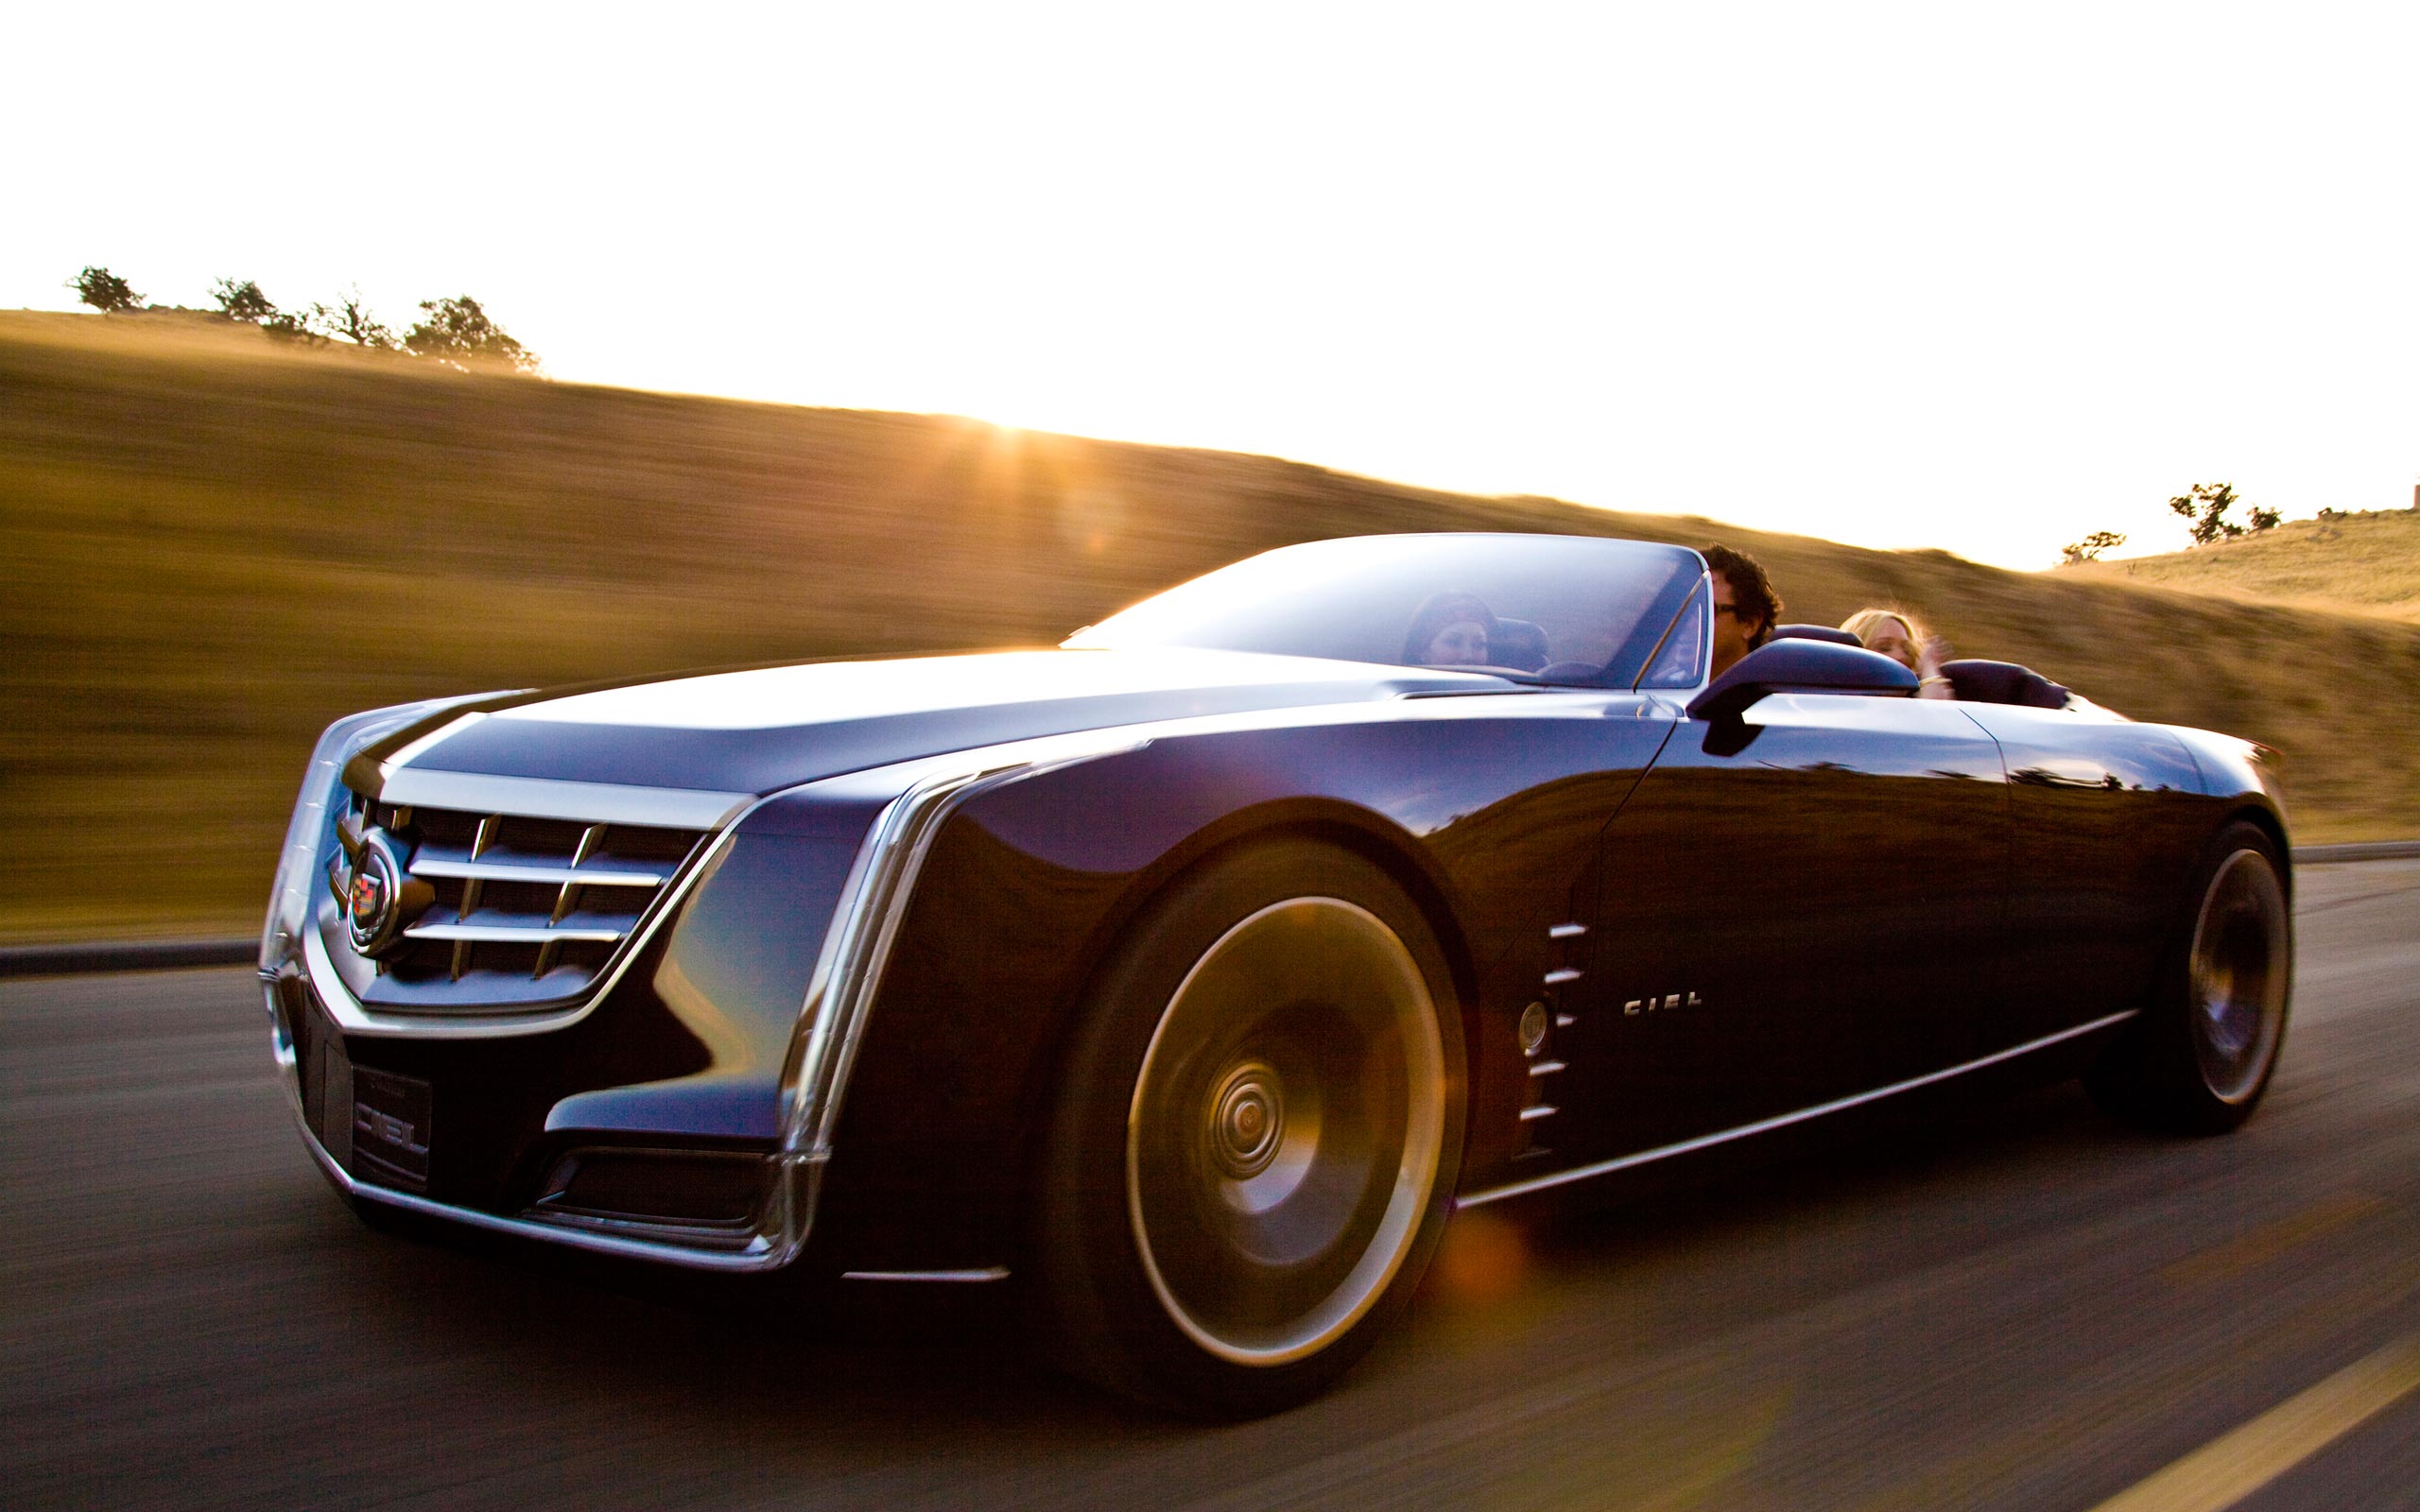 Cadillac Concept Wallpaper High Def Is Definition You